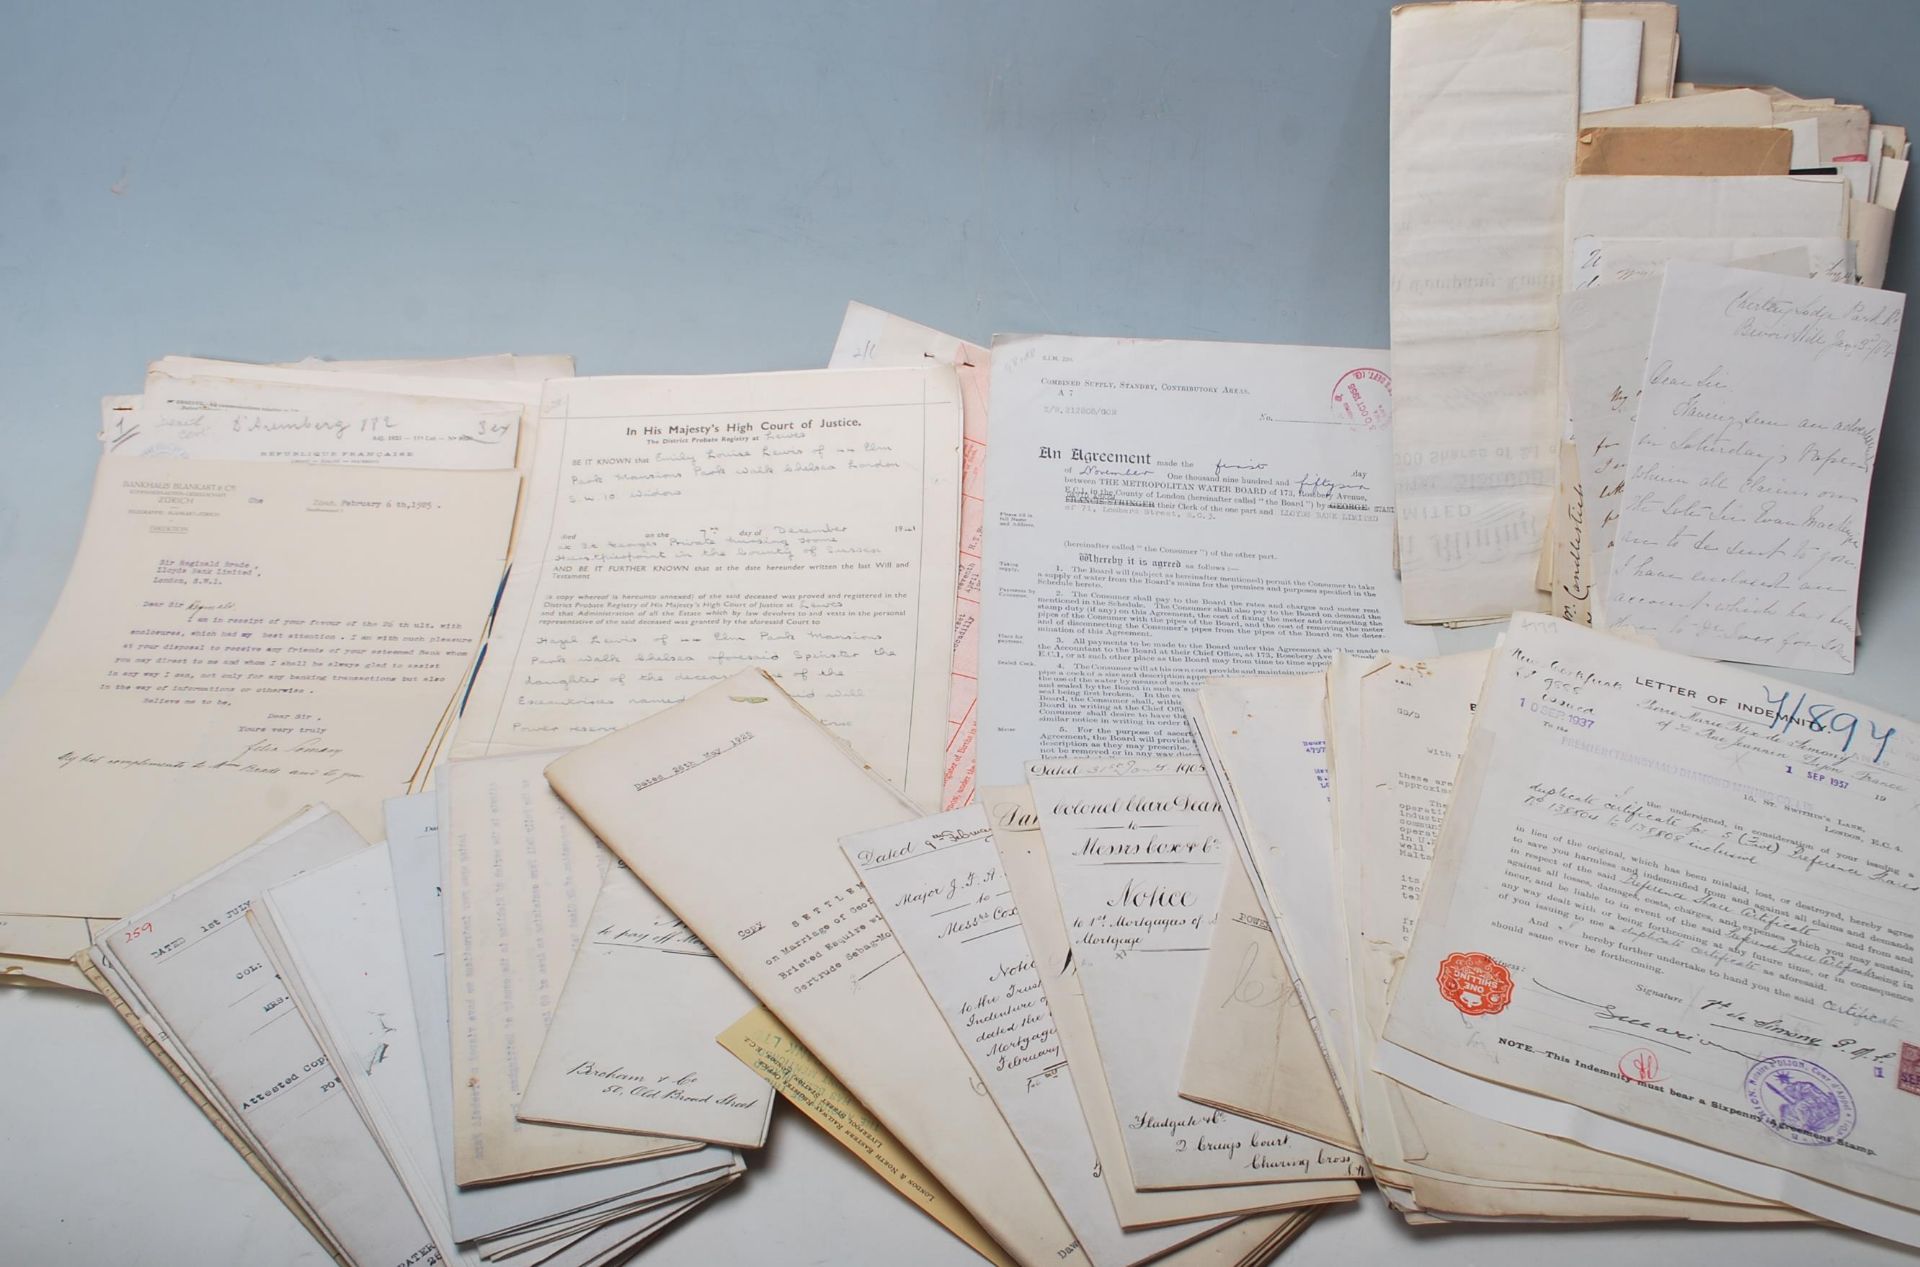 An excellent collection of early 20th century and later documents, letters, ephemera mostly from